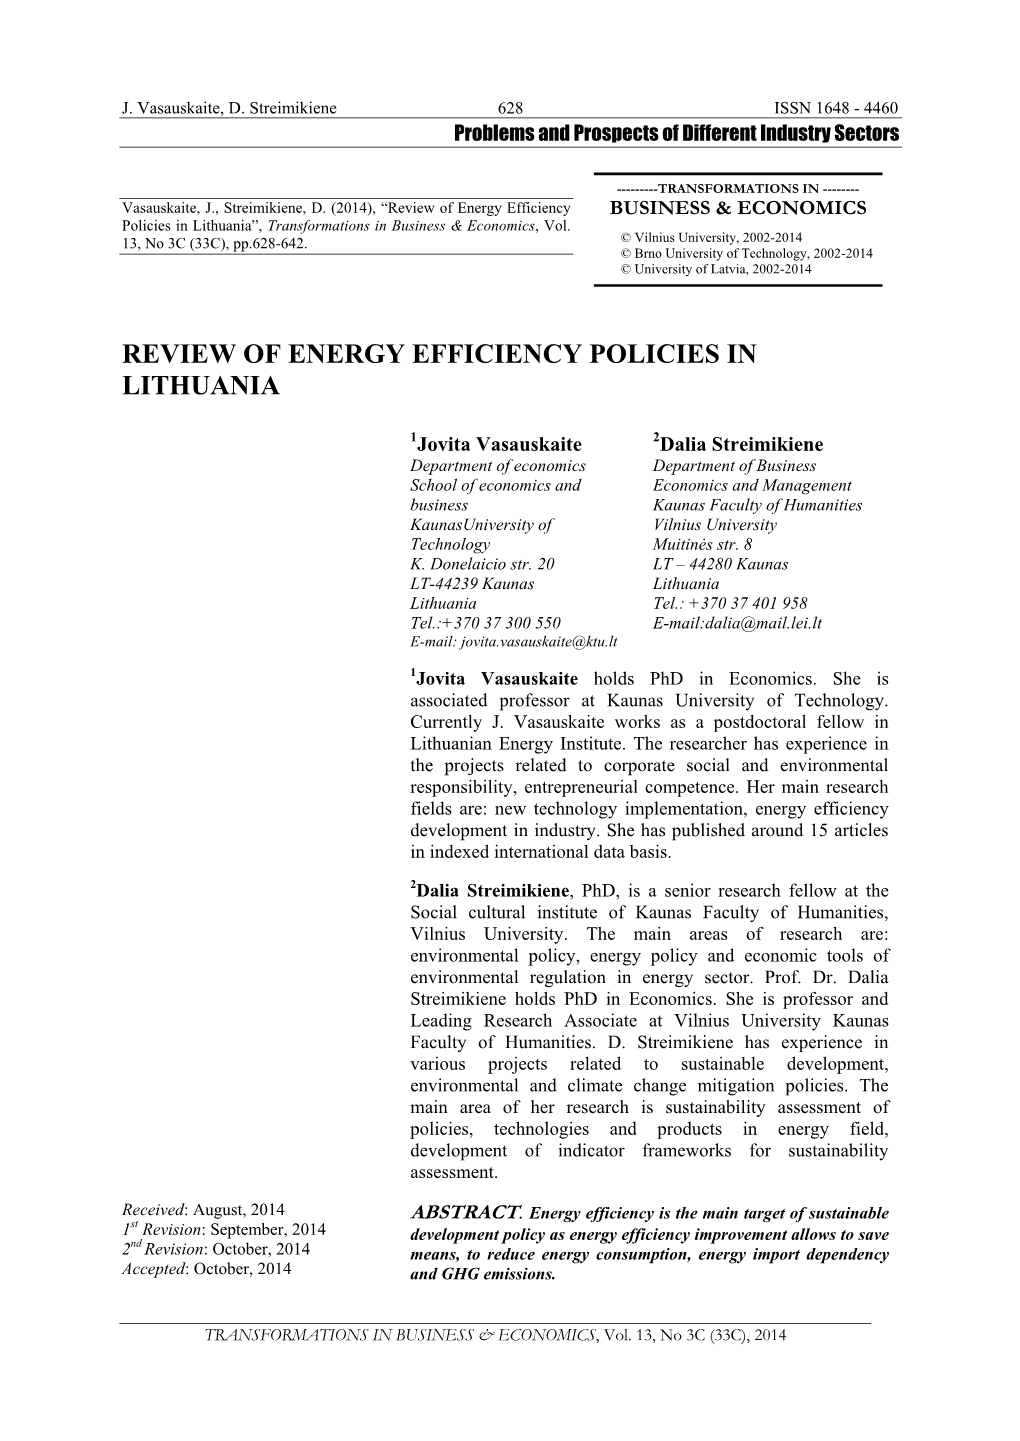 Review of Energy Efficiency Policies in Lithuania